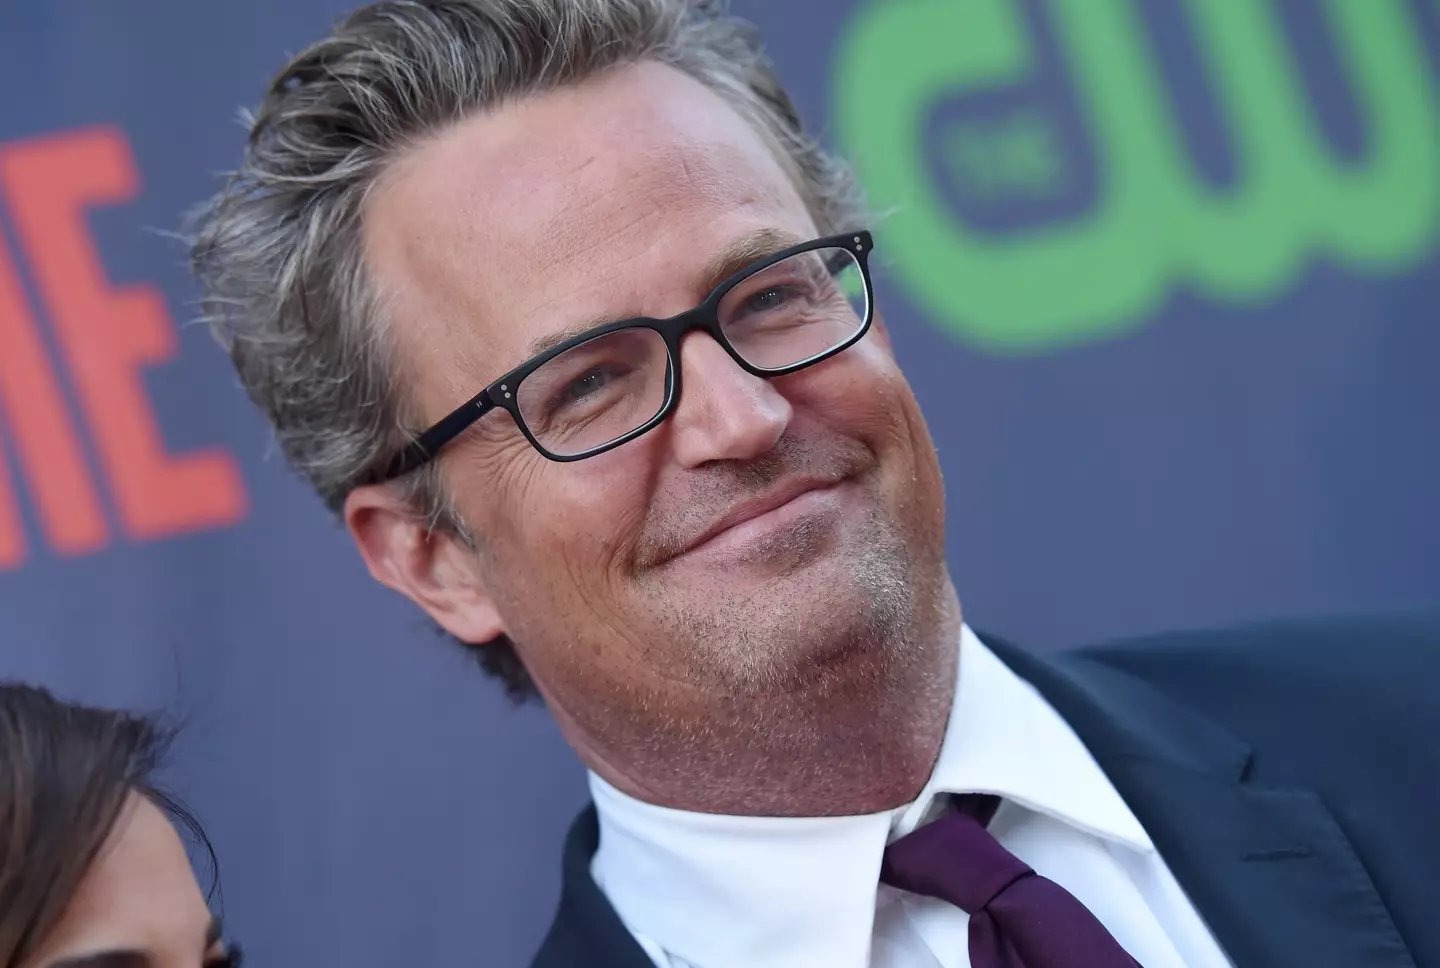 Matthew Perry has passed away at the age of 54.